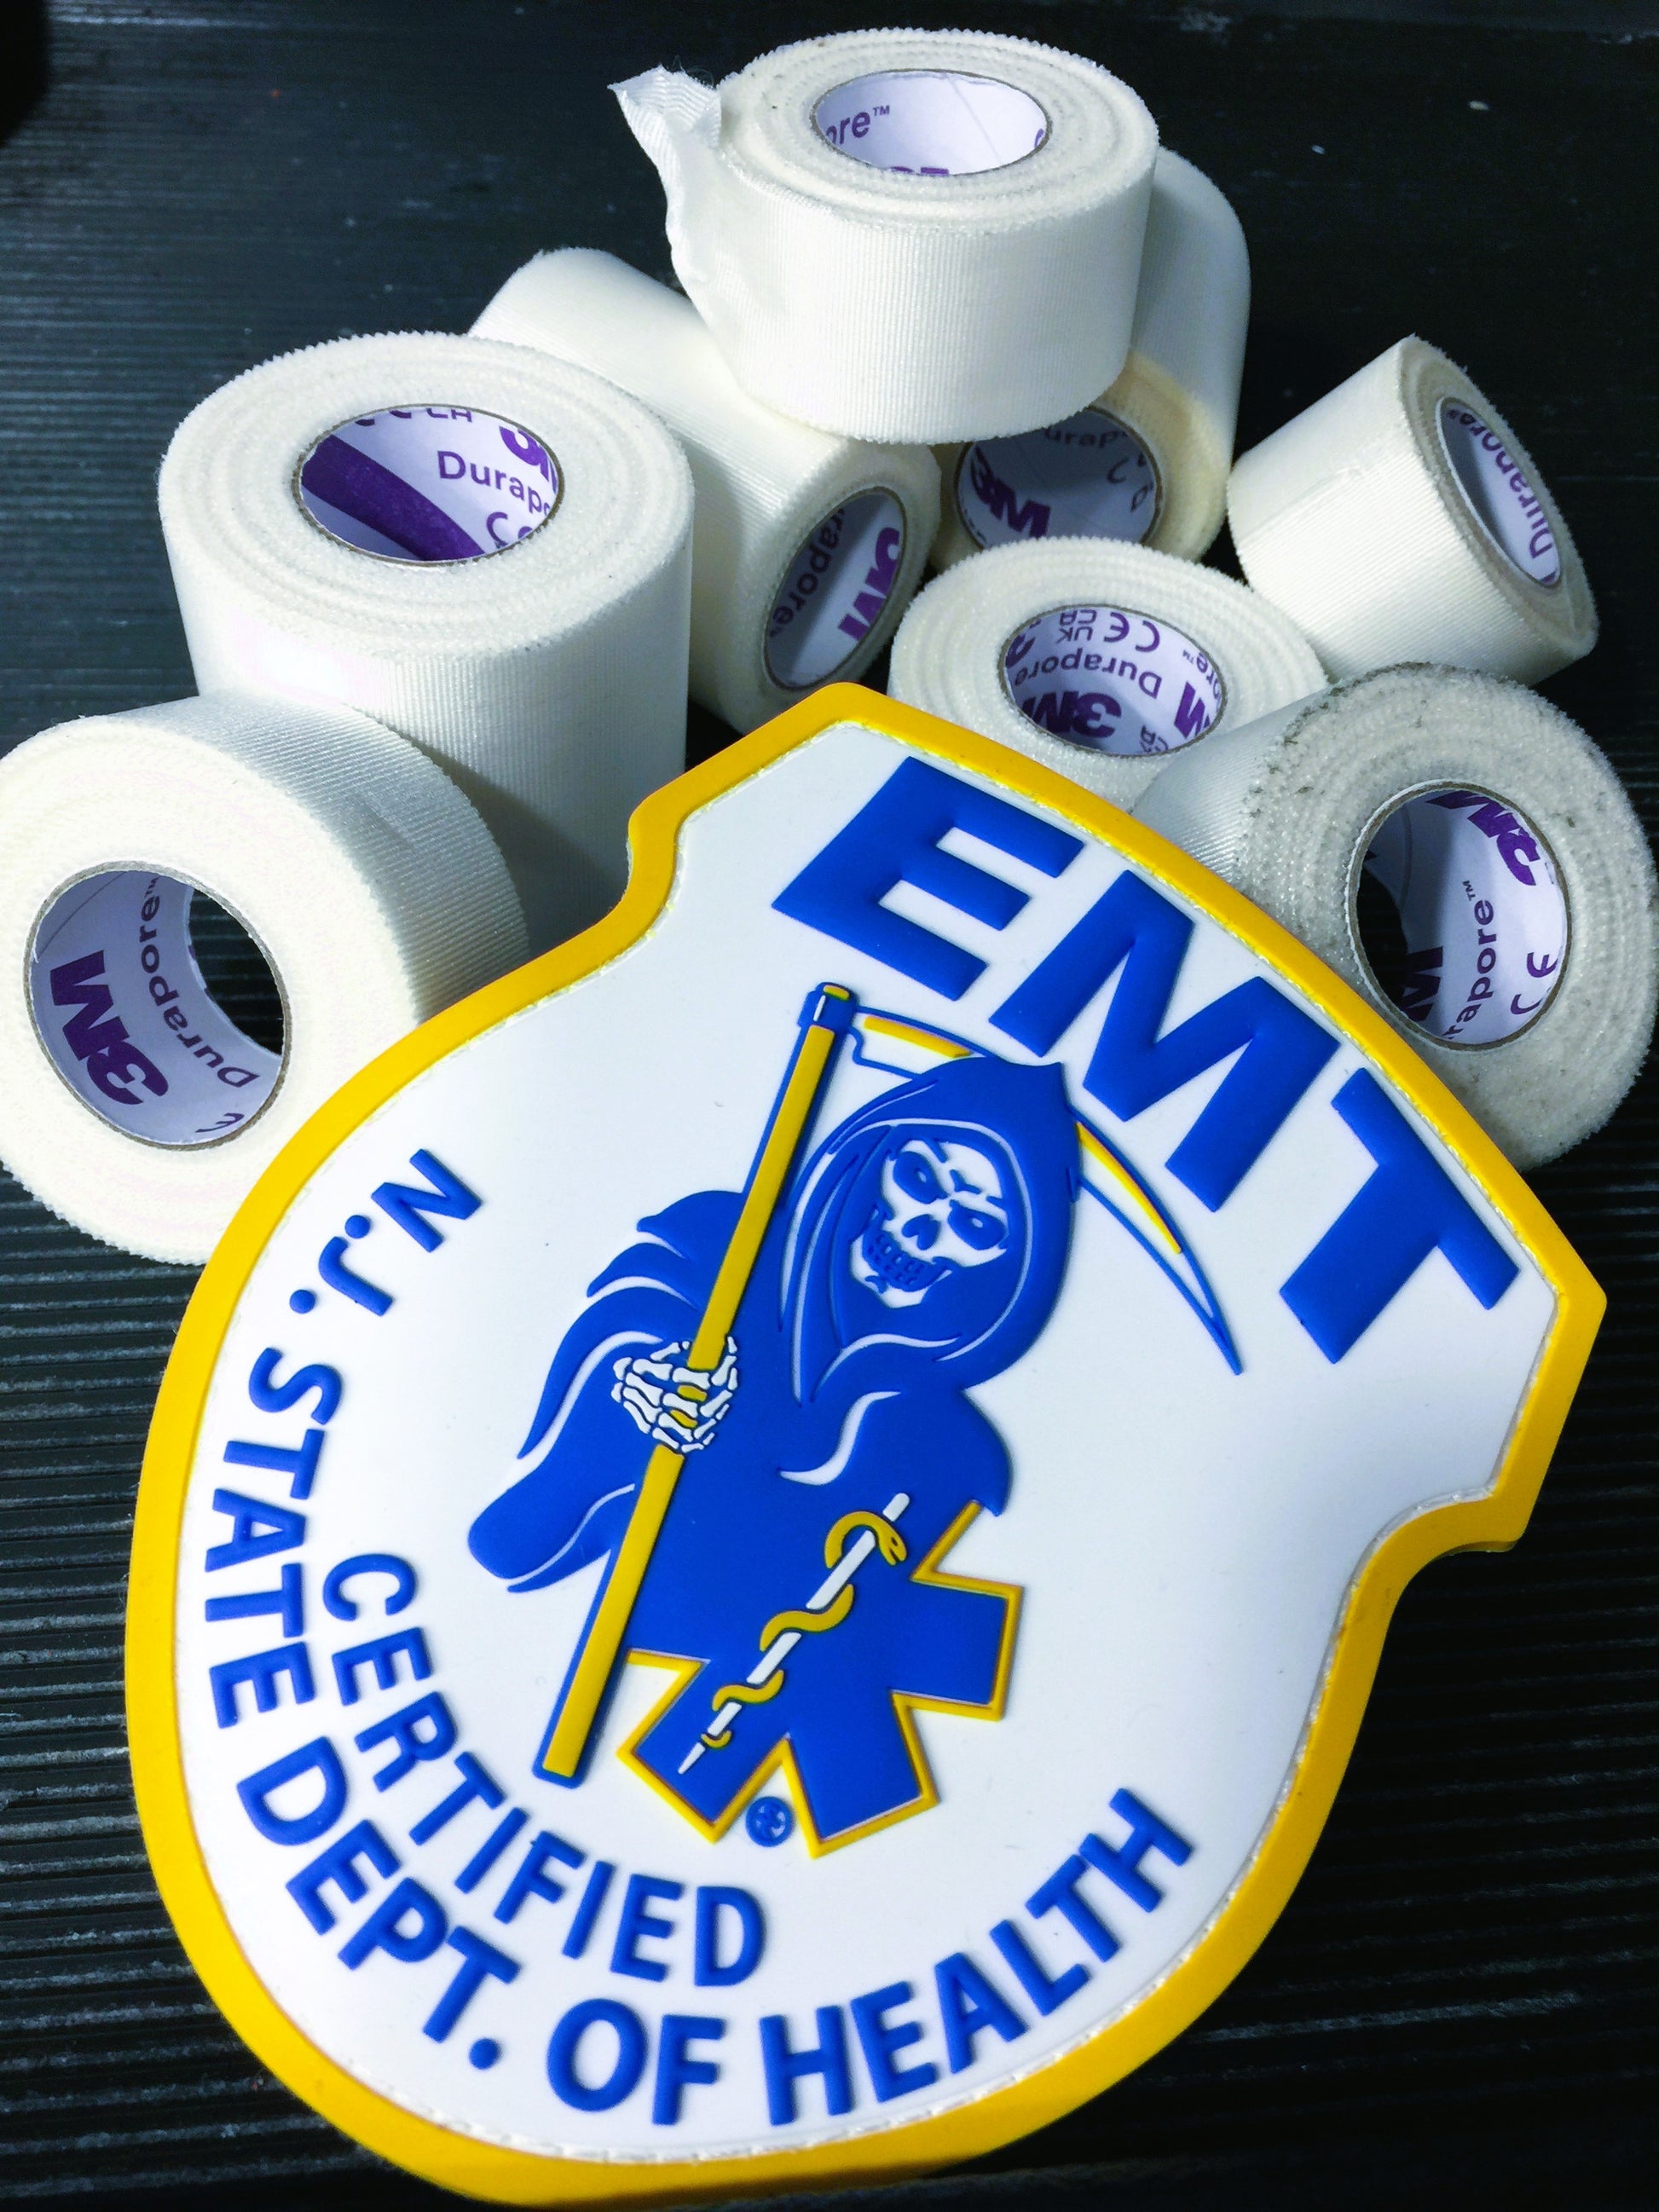 SKELL CITY NEW JERSEY EMT PATCH – Skell City